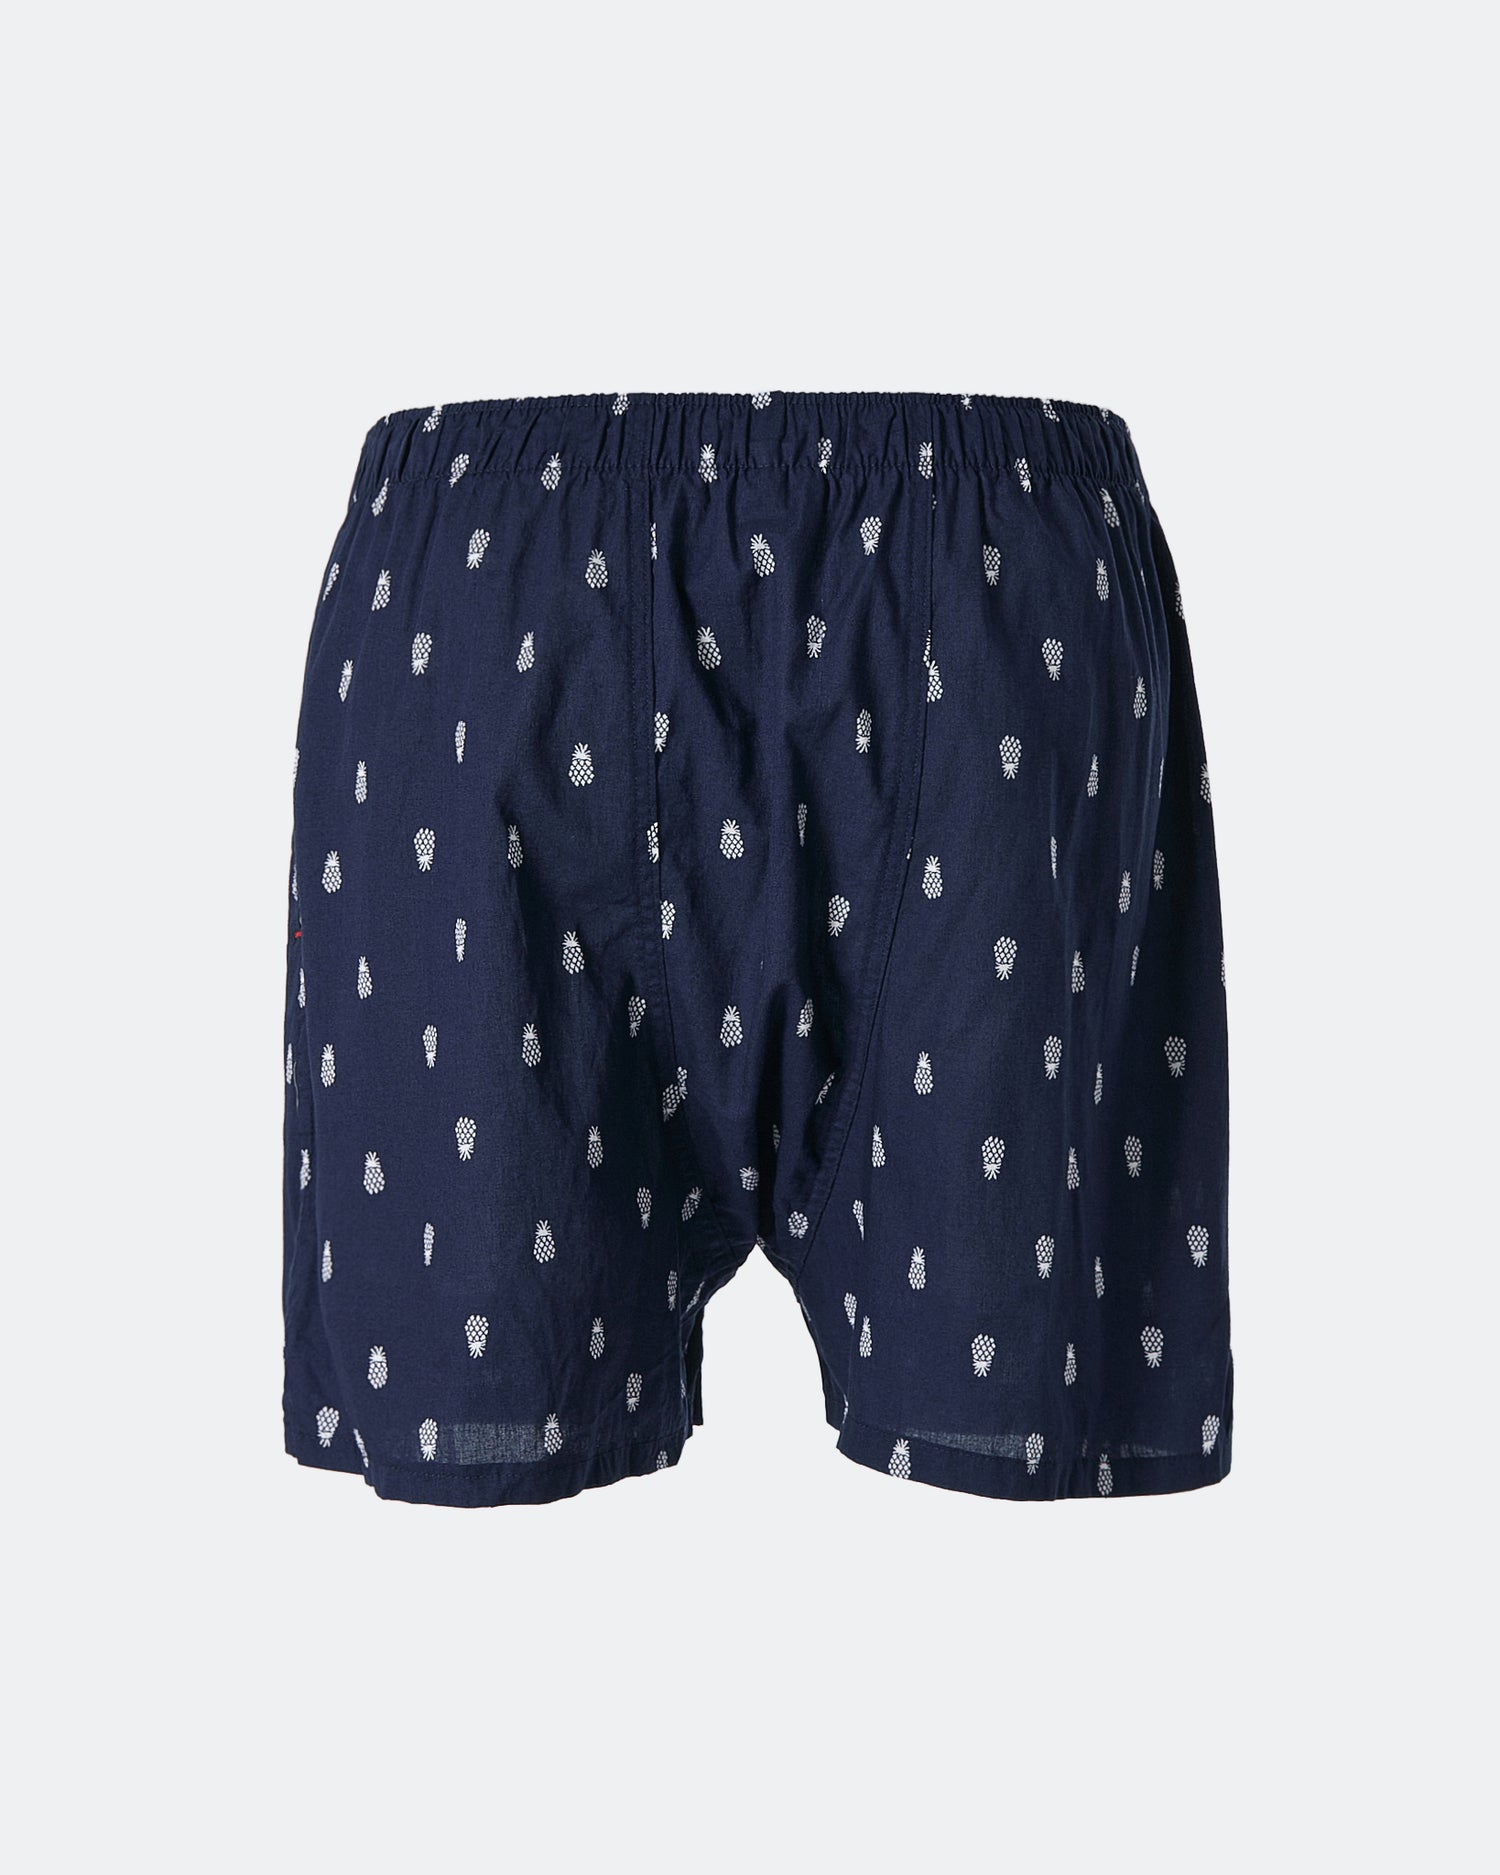 TH Pineapple Over Printed Men Boxer 6.90